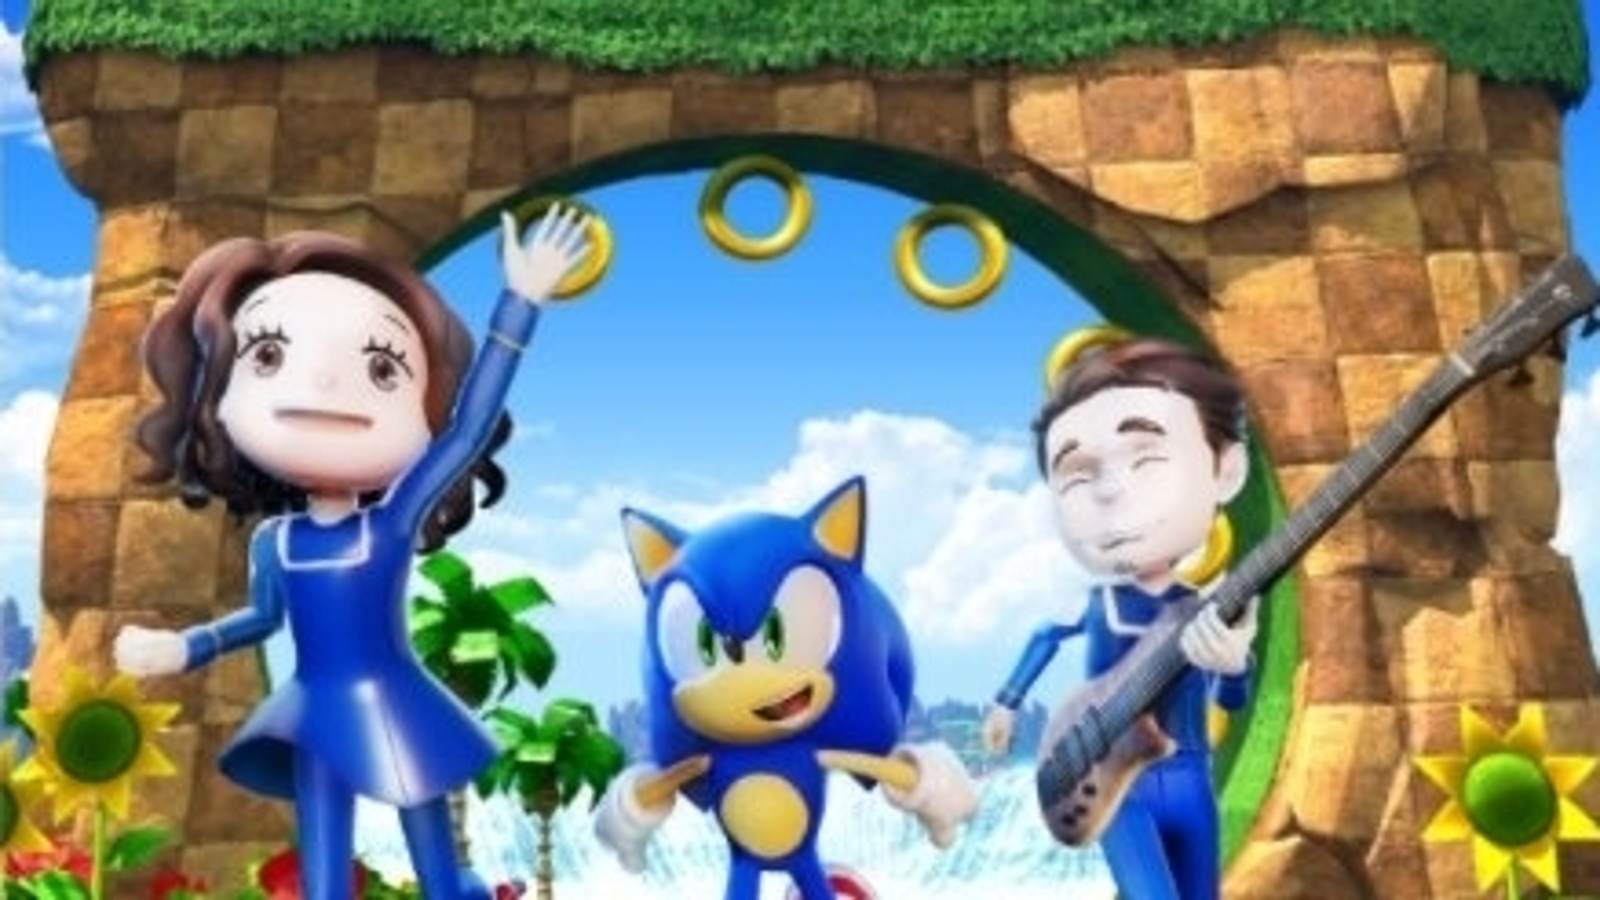 Sonic's Green Hill Zone Has Lyrics Now, Apparently